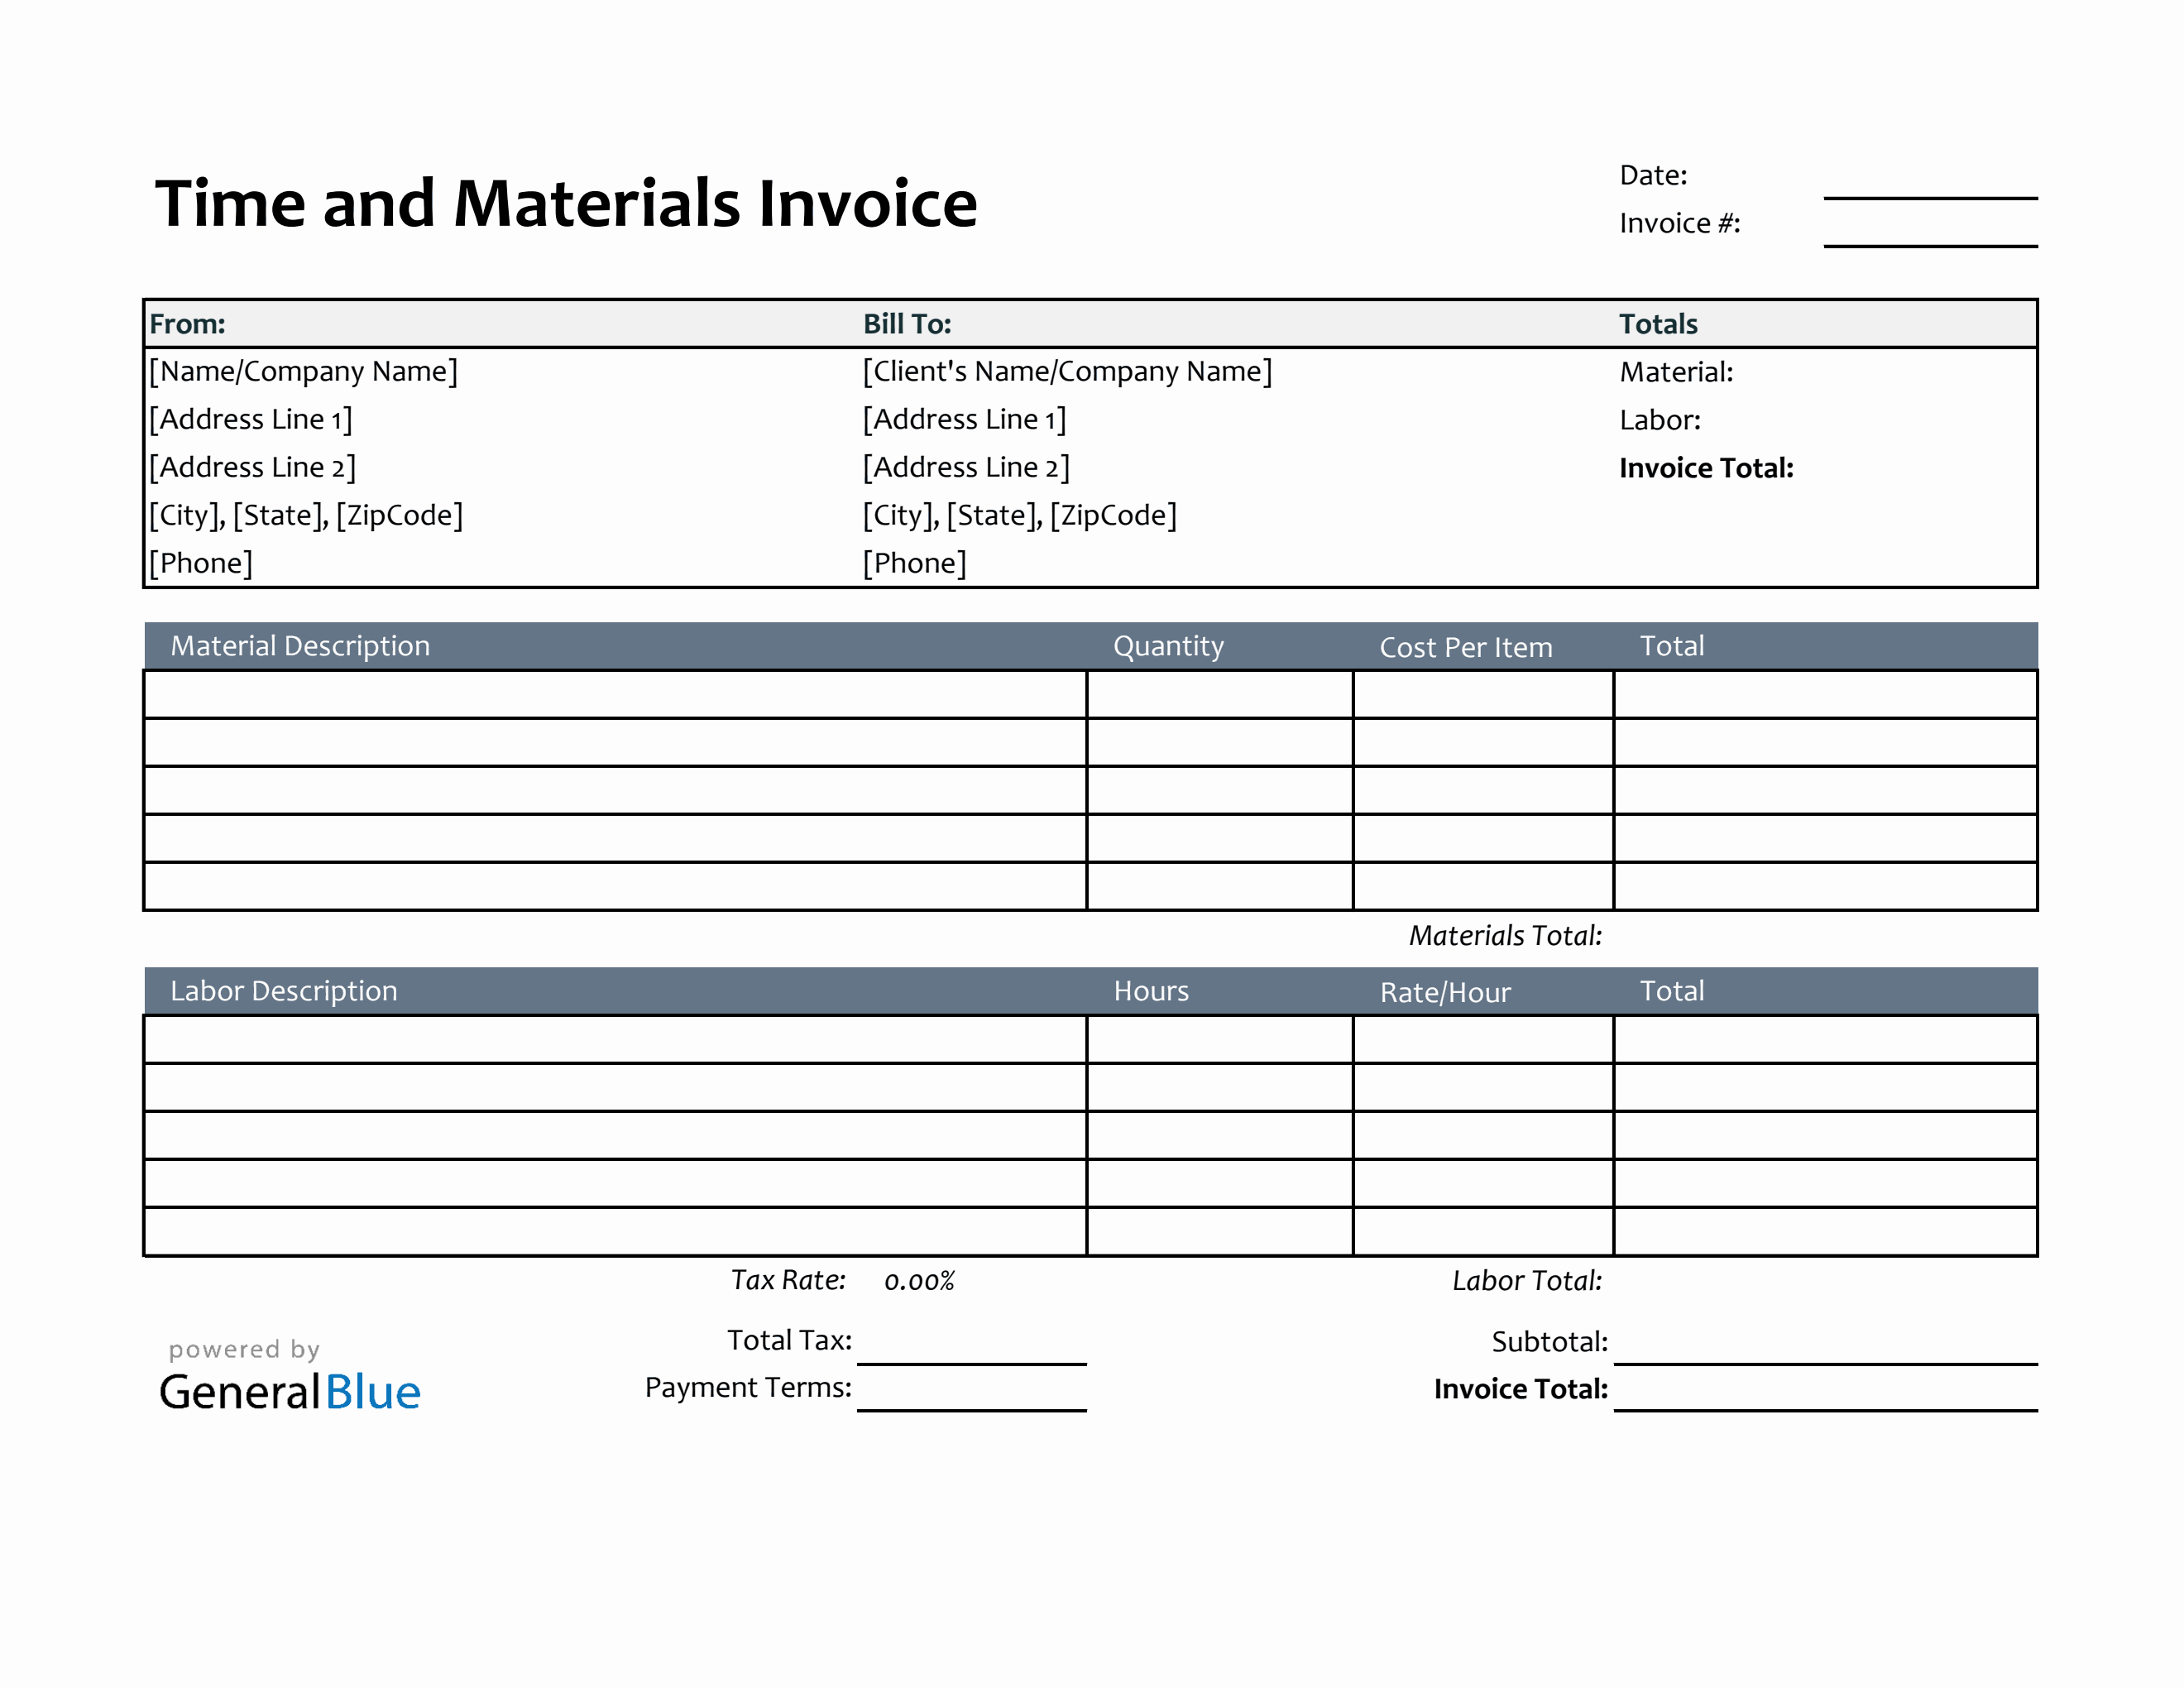 printable-time-and-materials-invoice-in-excel-colorful